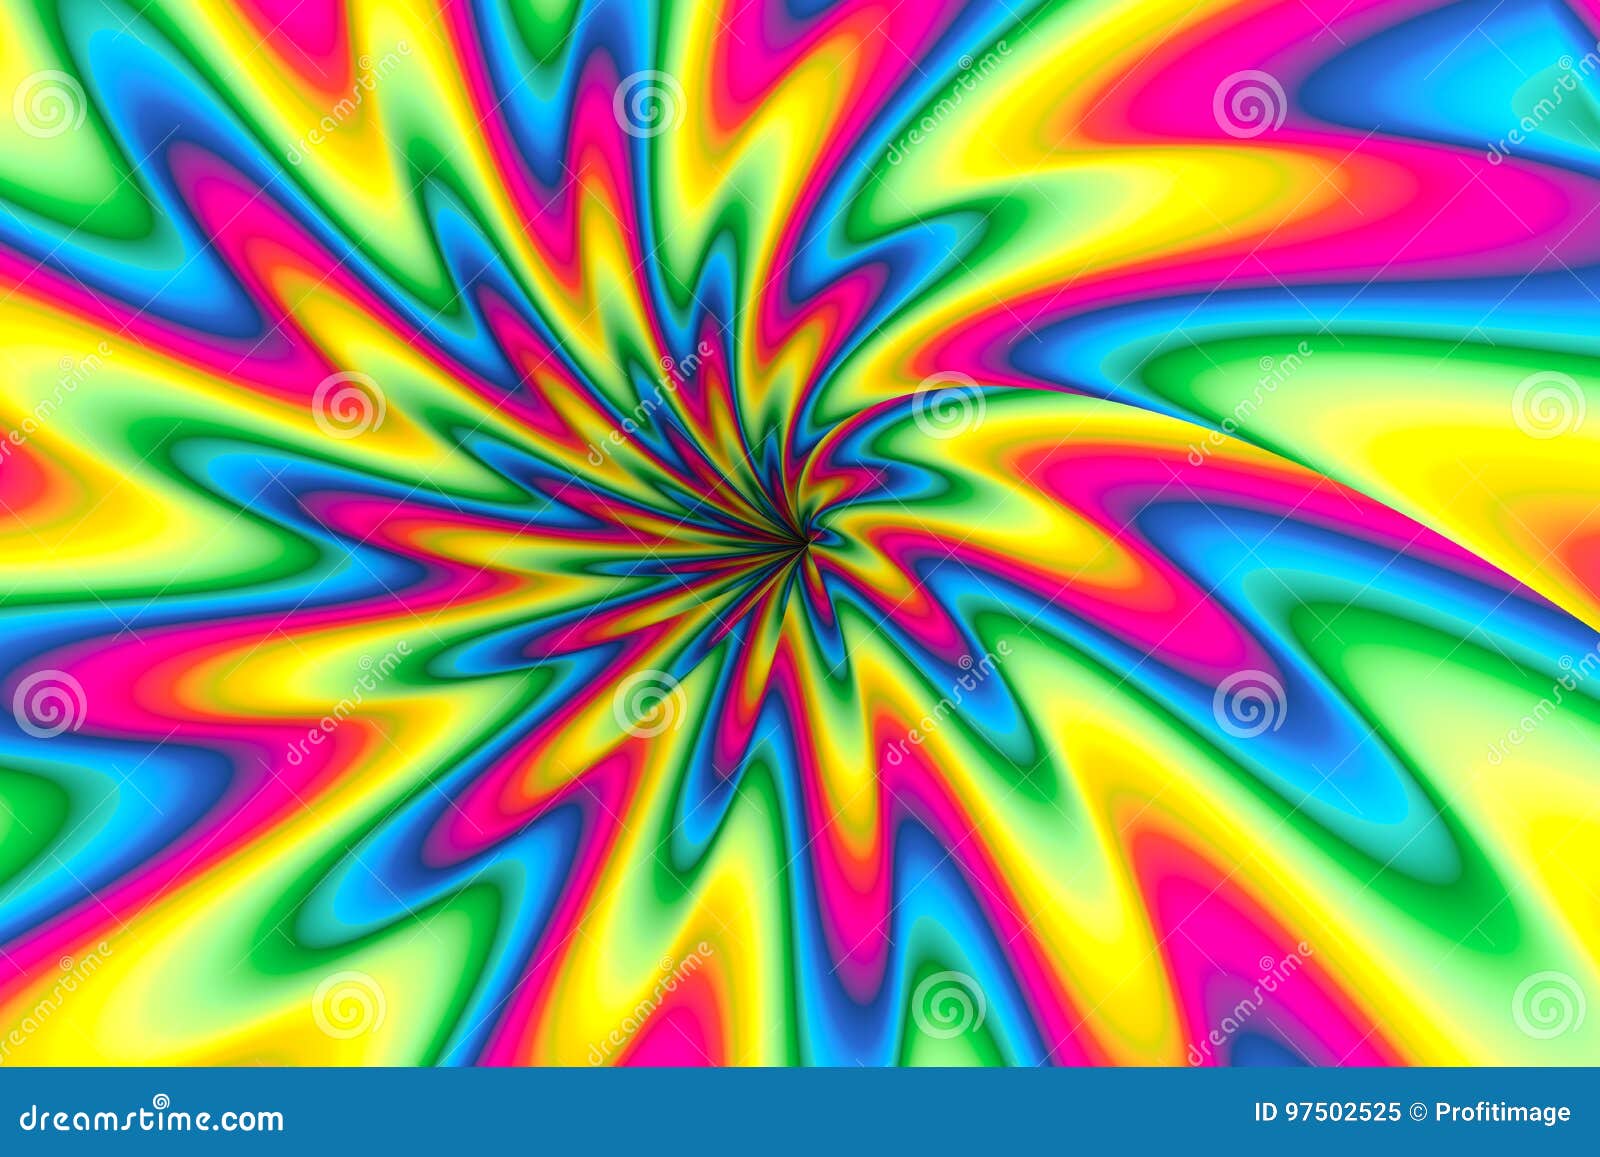 colorful abstract background psychedelia